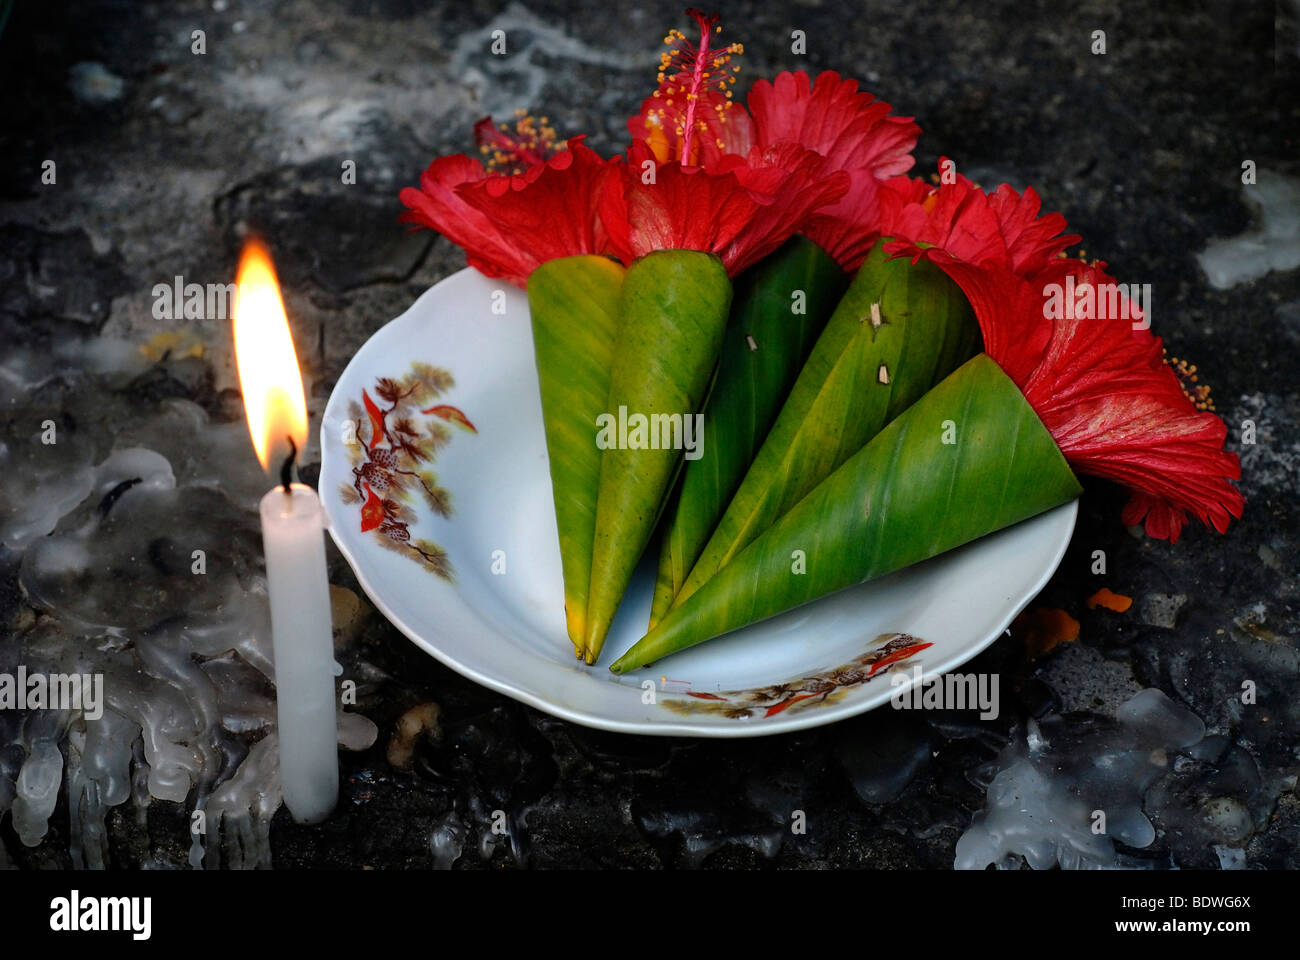 Laotian Buddhist offering with a lit candle at the Mount Phousi, landmark mountain of Luang Prabang on the Mekong, Luang Praban Stock Photo